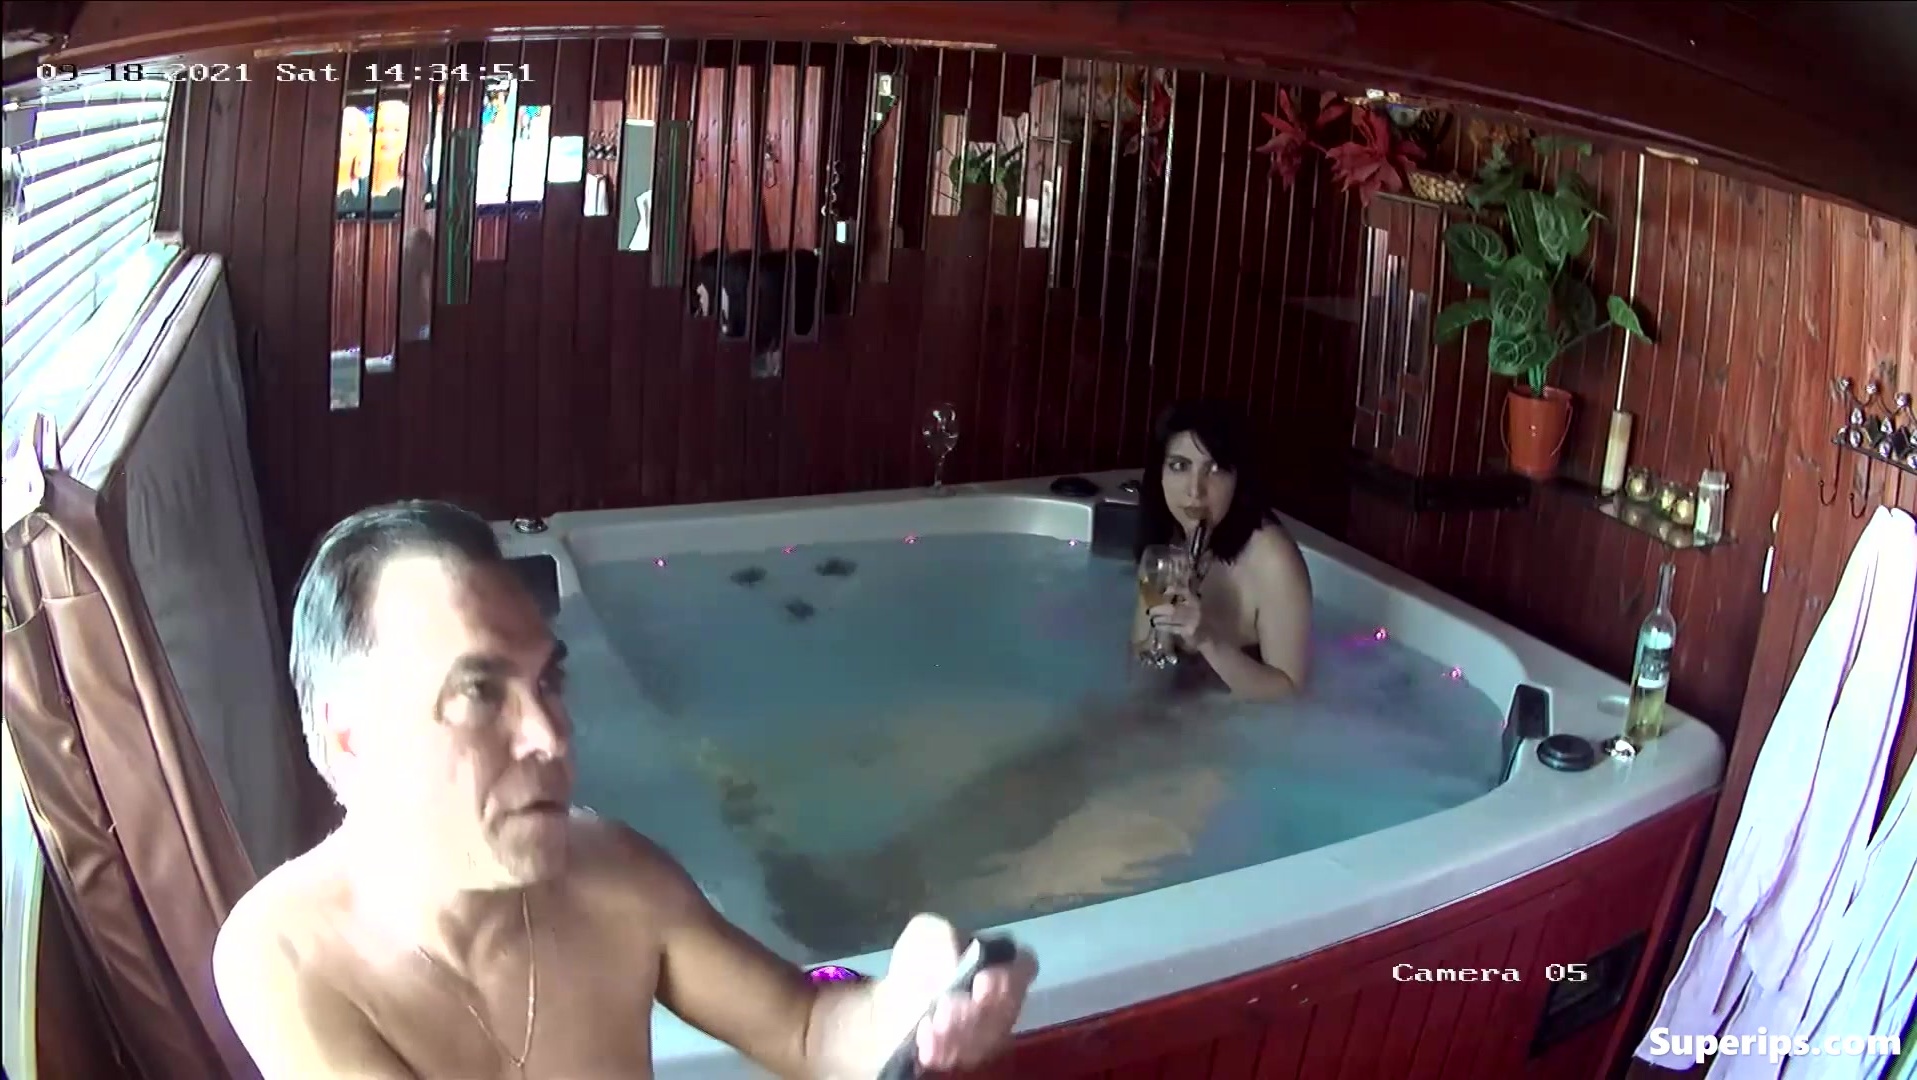 ﻿Old man fucks a young girl in the Jacuzzi